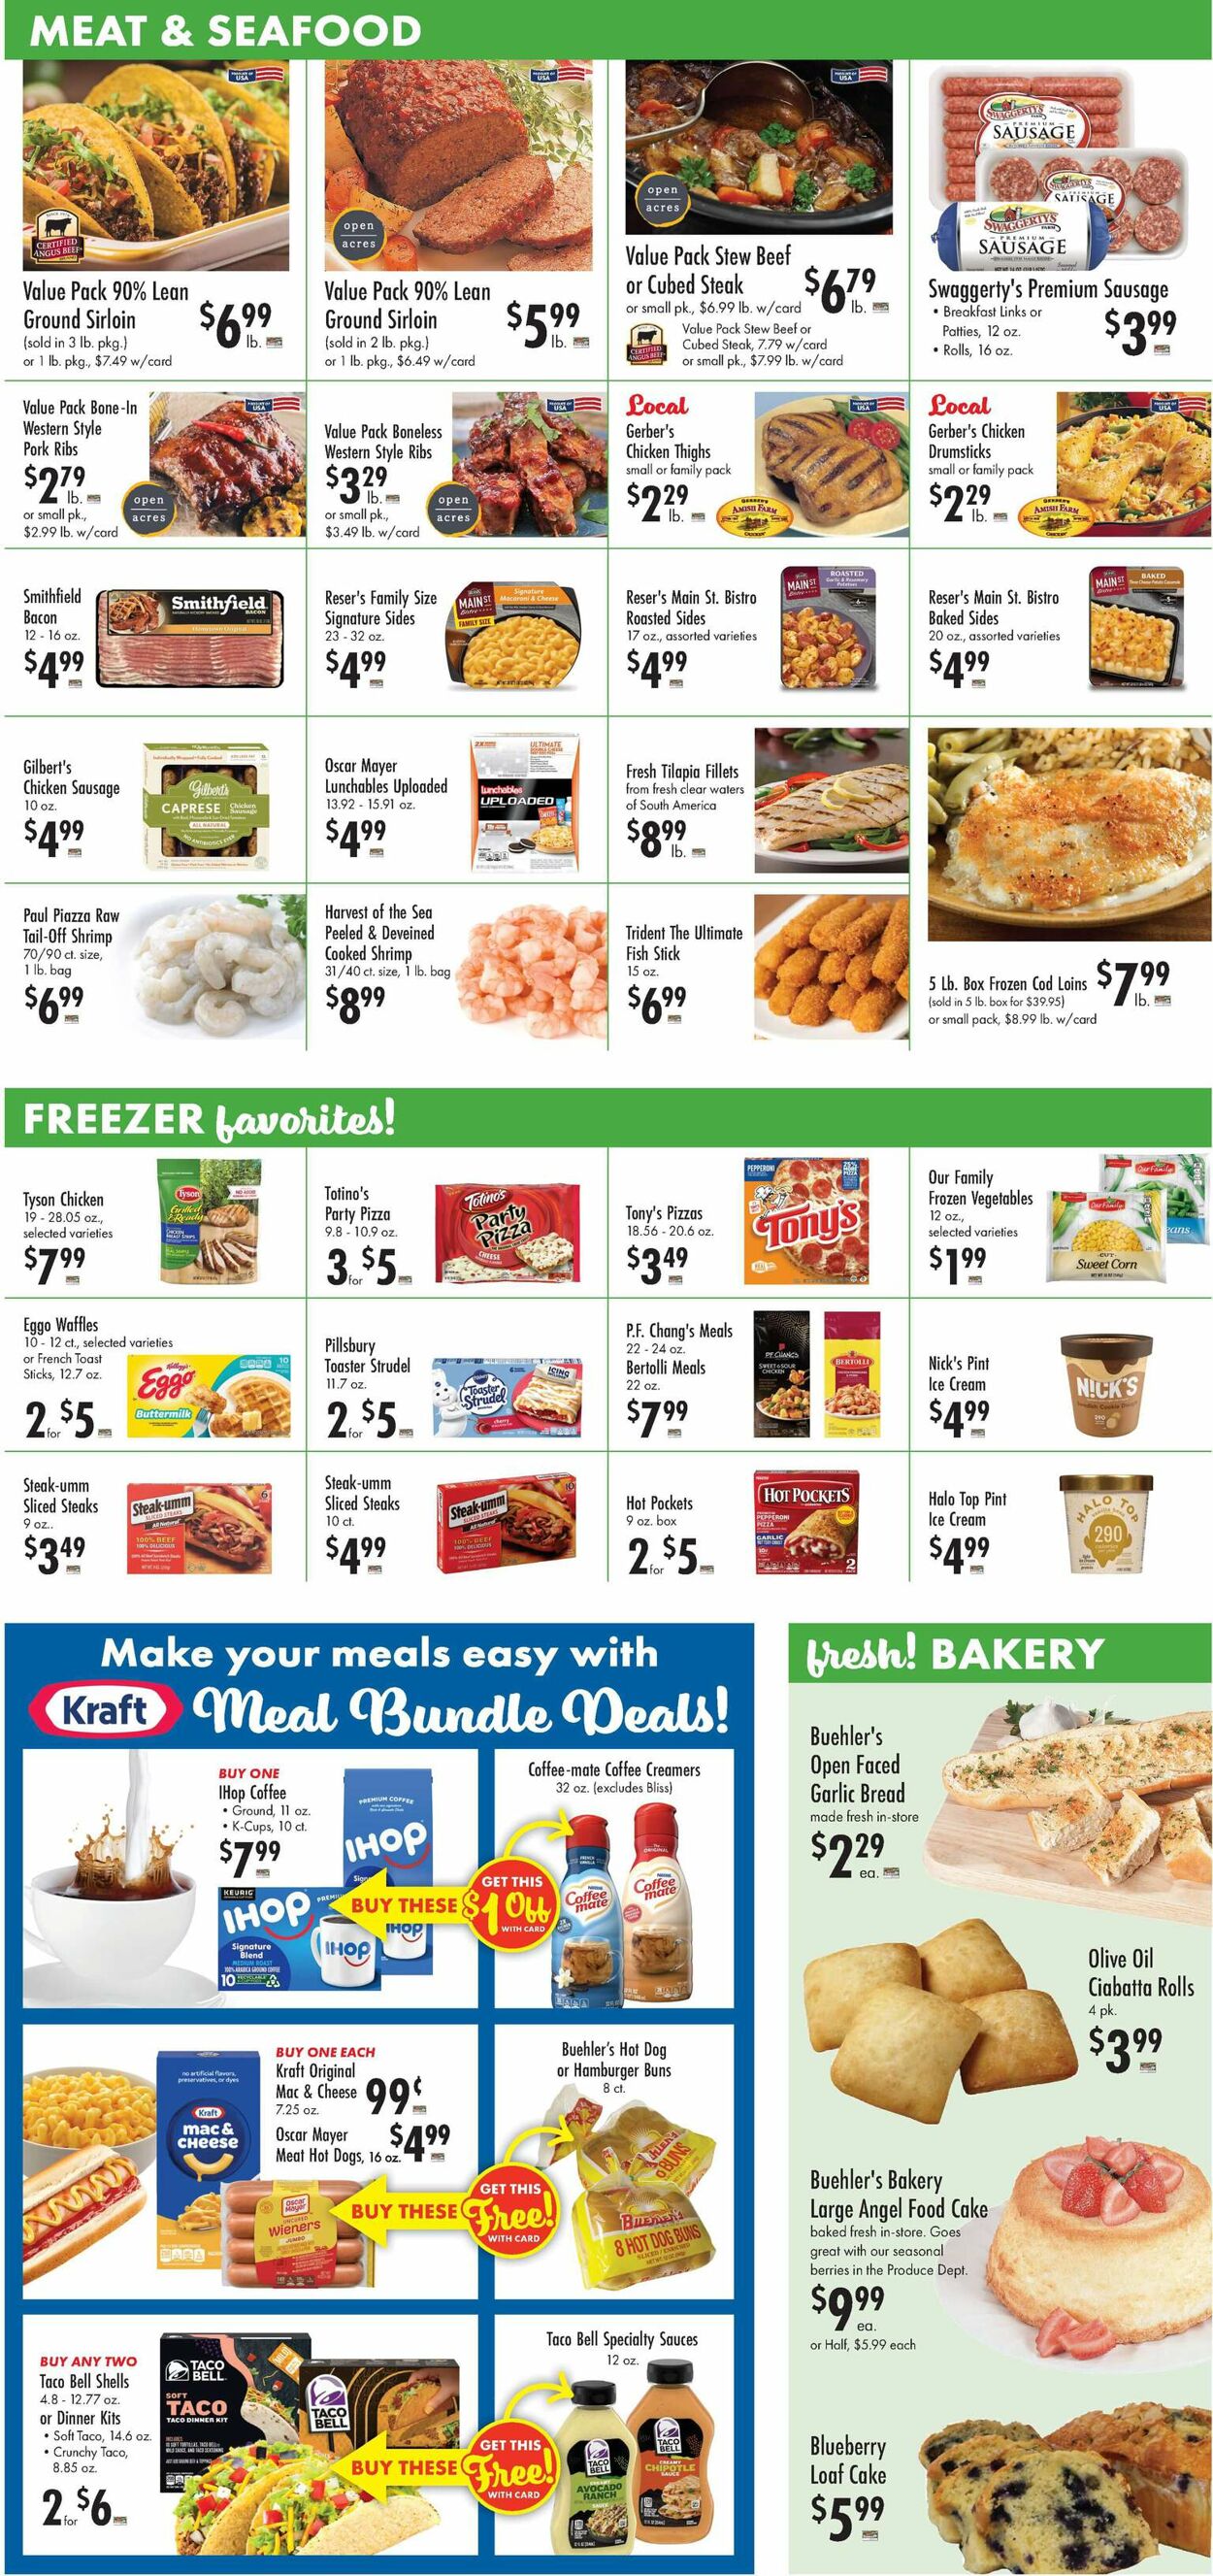 Catalogue Buehler's Fresh Foods from 01/17/2024